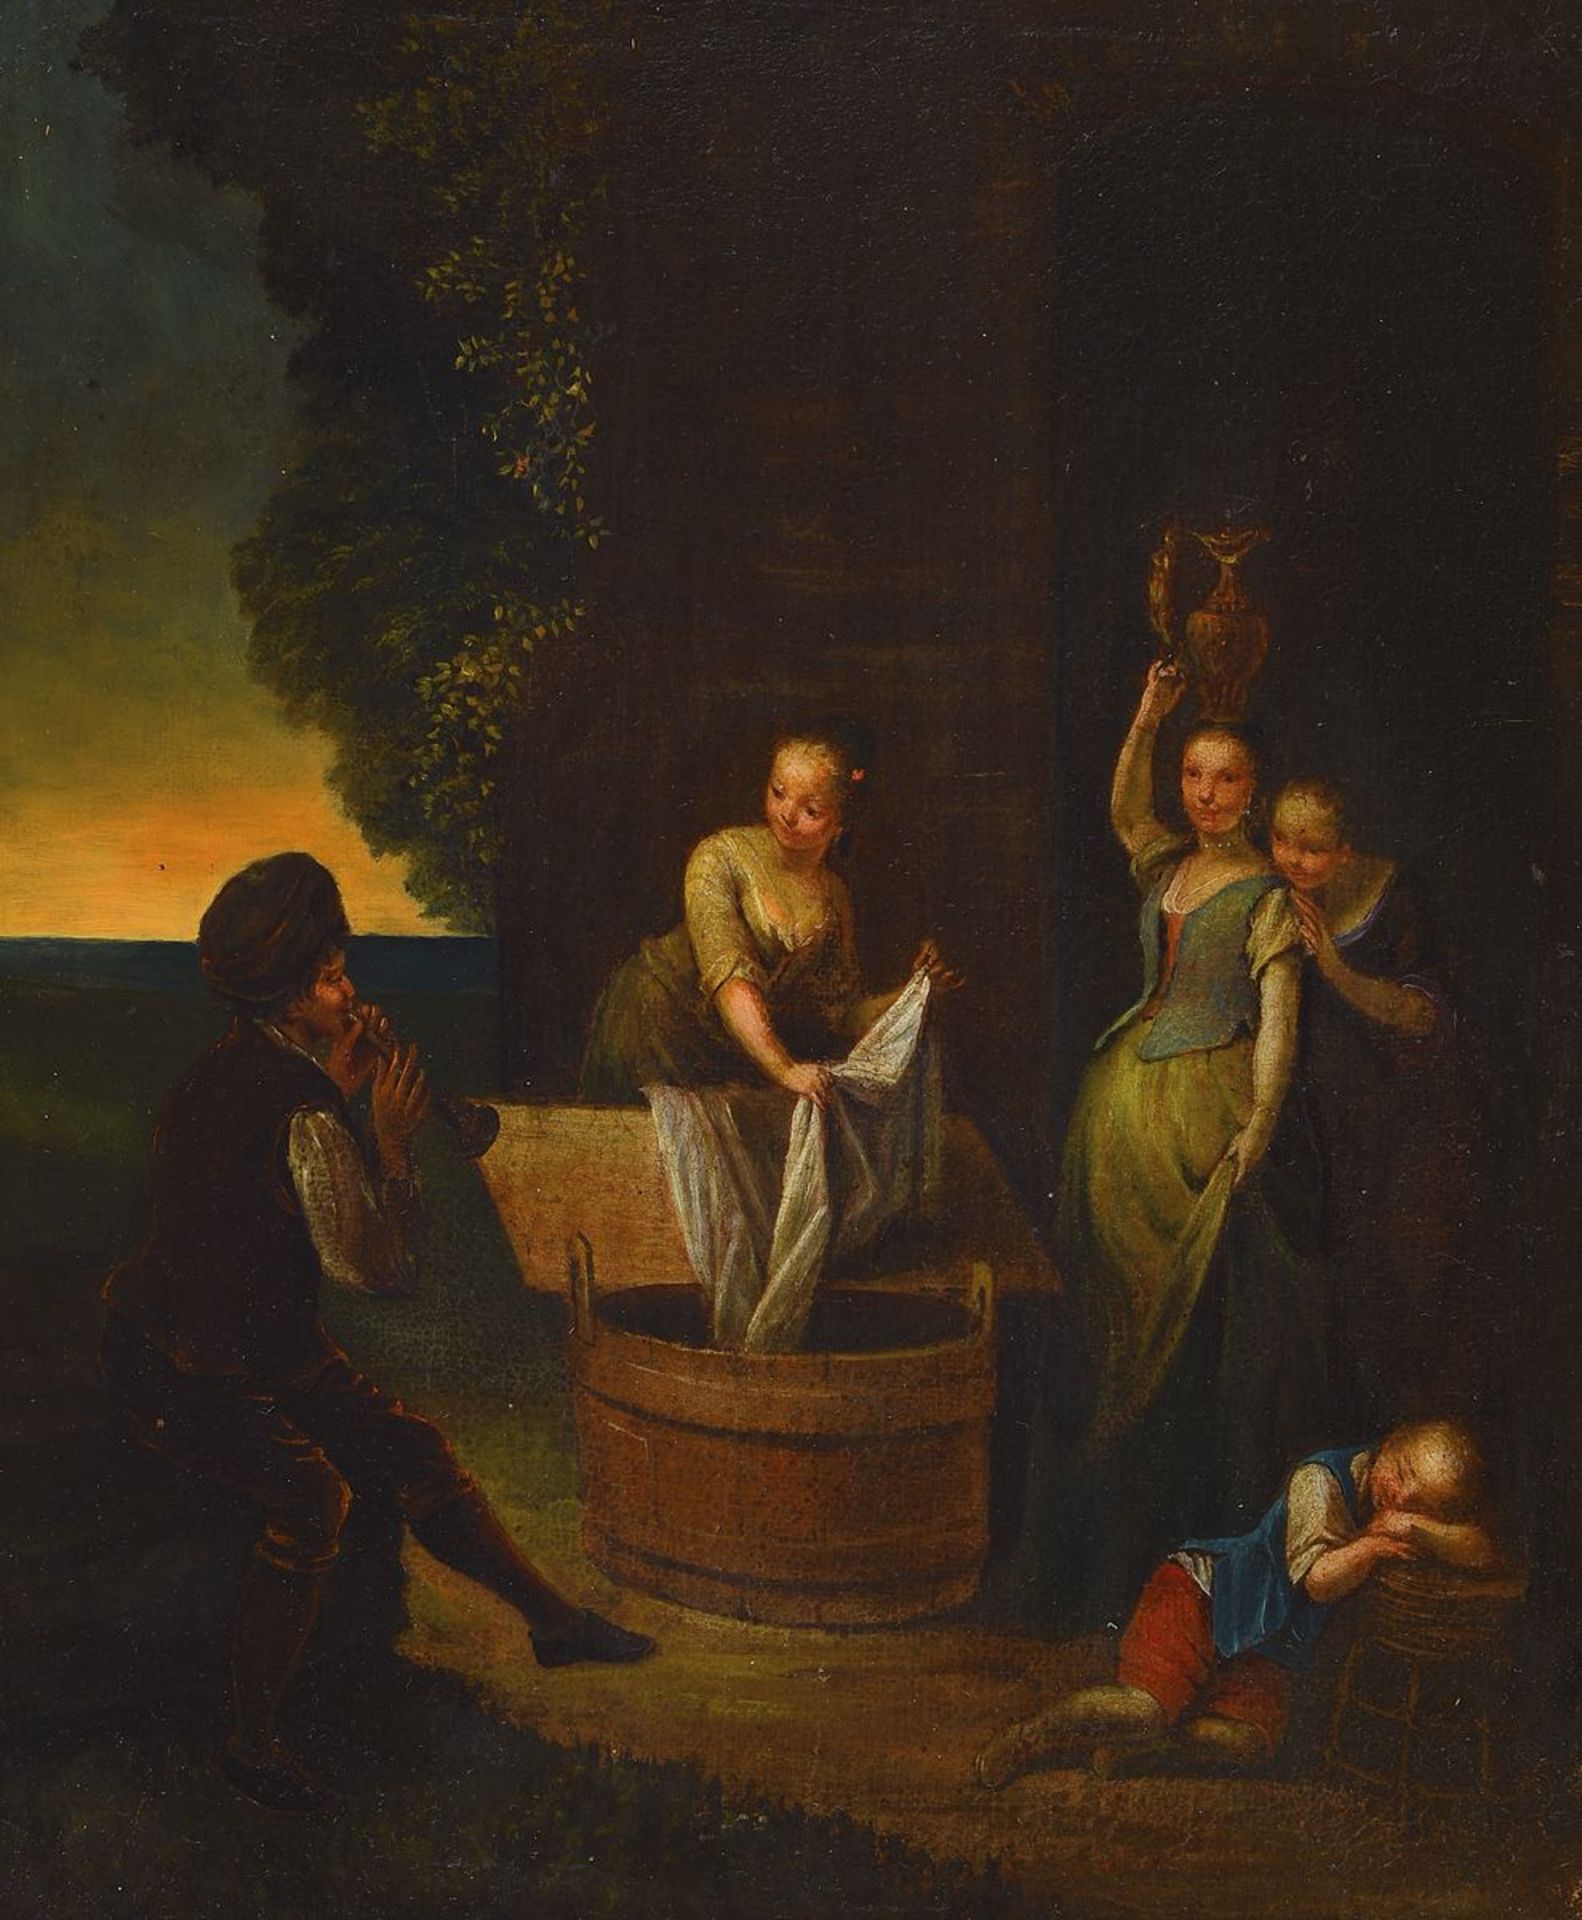 Unidentified artist, France, 18th C., Genre scene with washing women and people, oil / canvas,